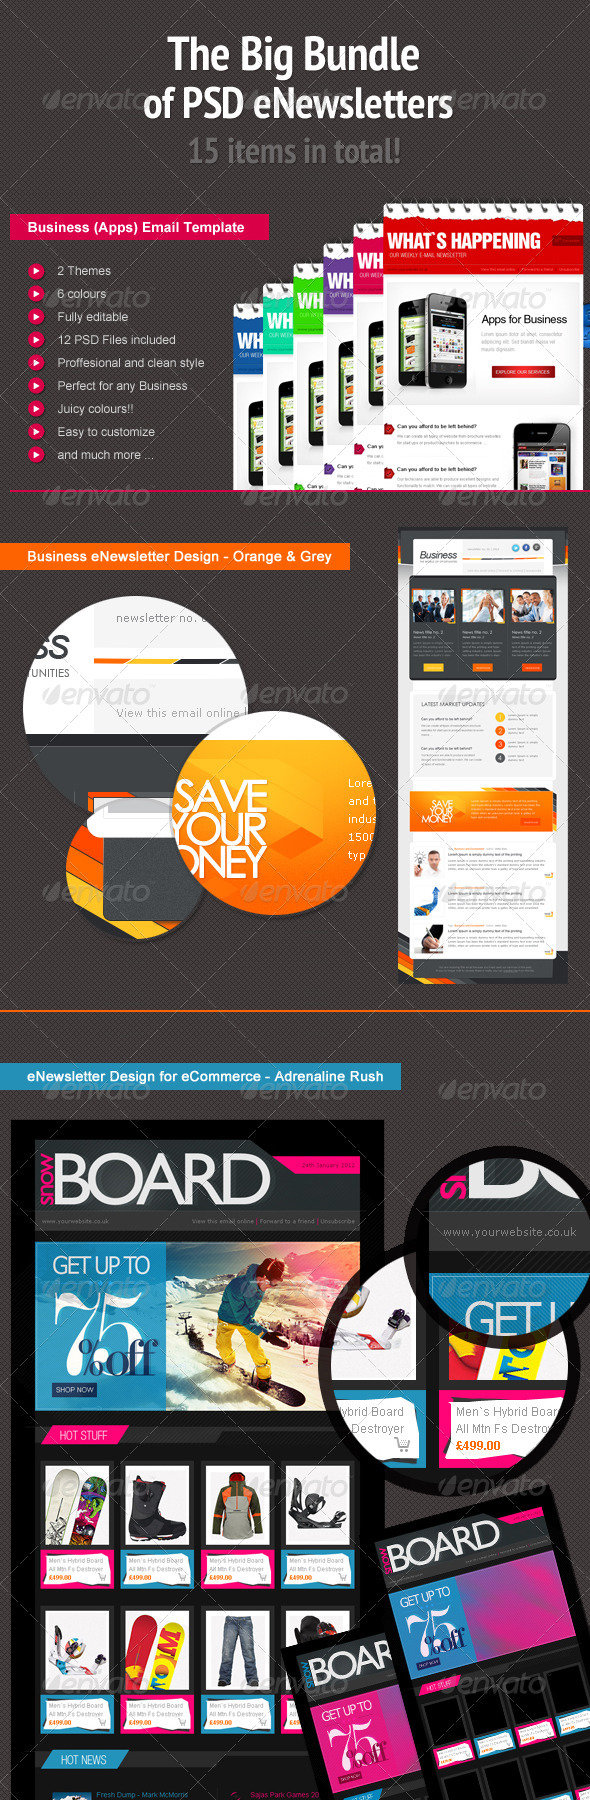 Download Mock Up E Newsletter Templates From Graphicriver